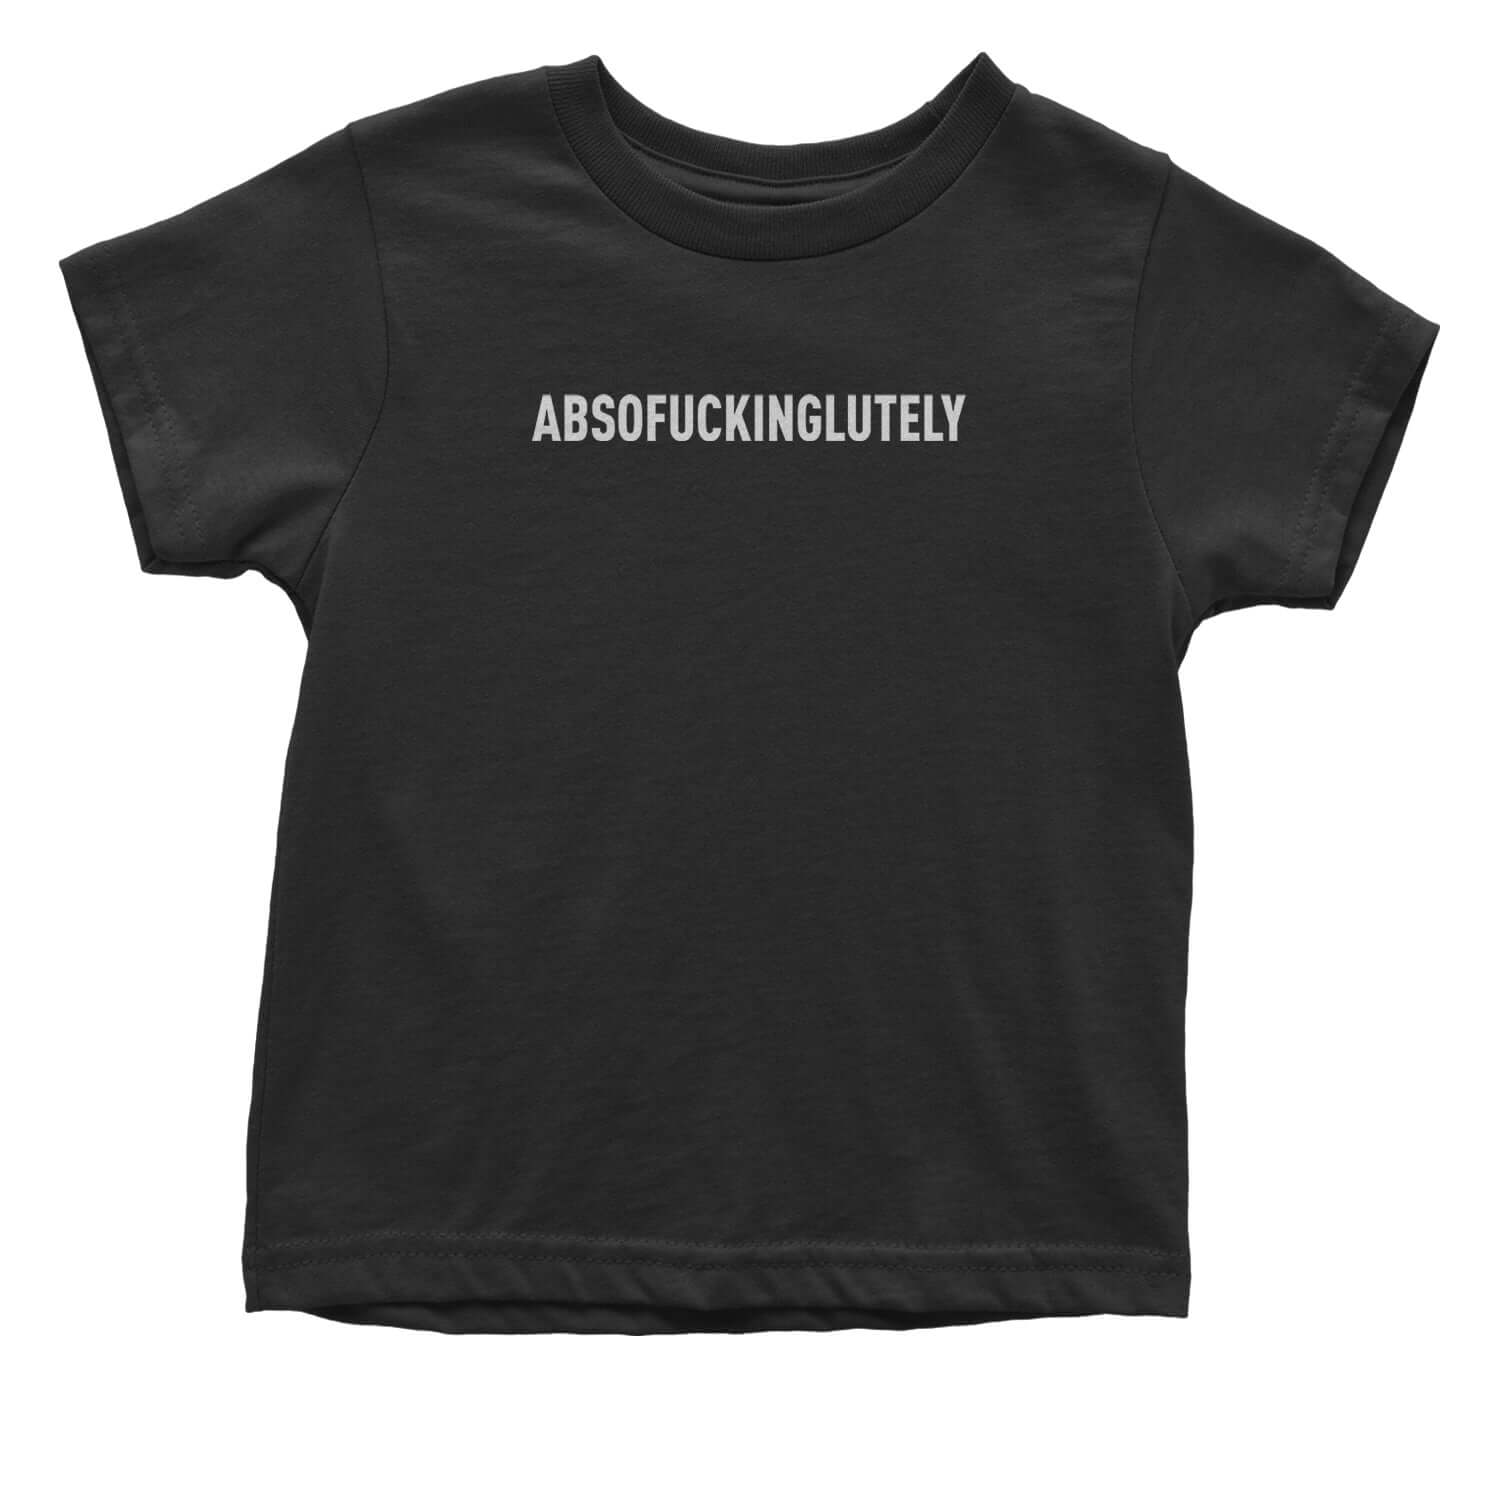 Abso f-cking lutely Infant One-Piece Romper Bodysuit and Toddler T-shirt funny, shirt by Expression Tees